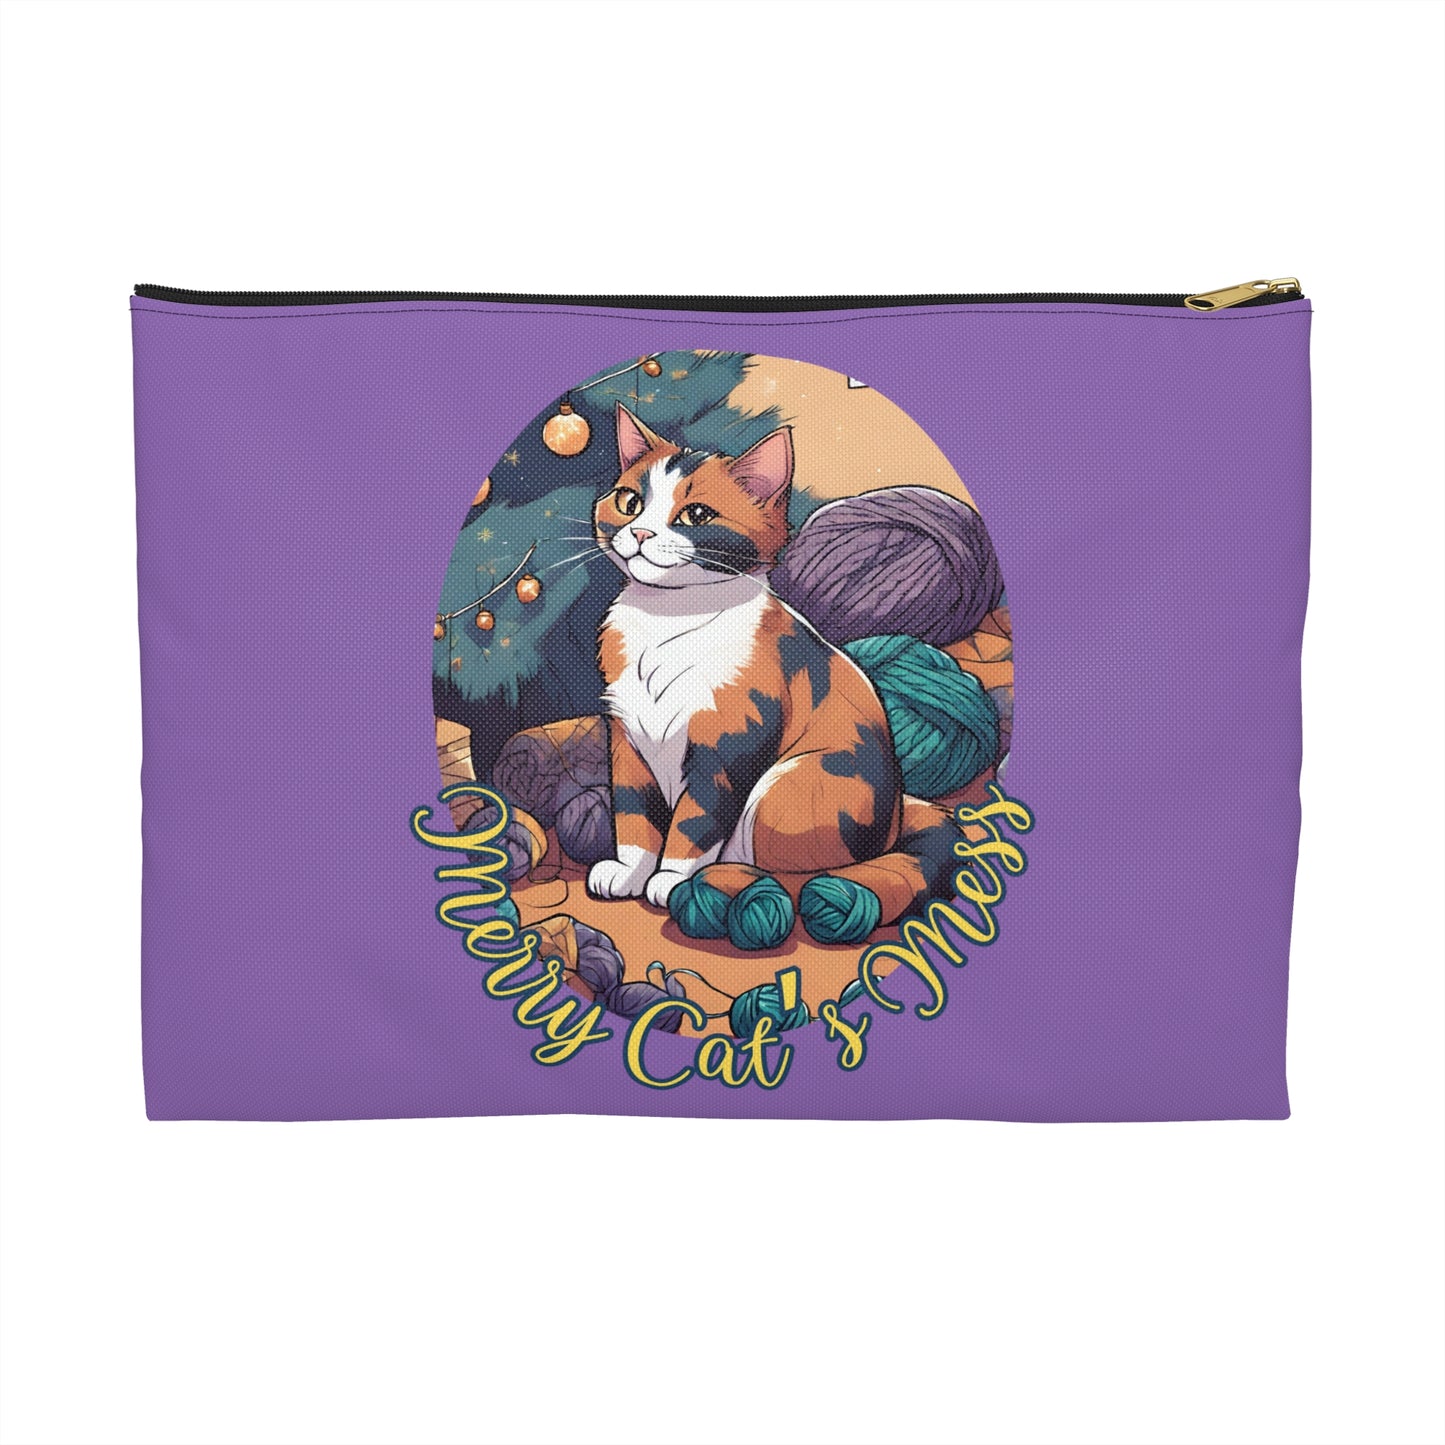 Merry Cat's Mess Accessory Pouch